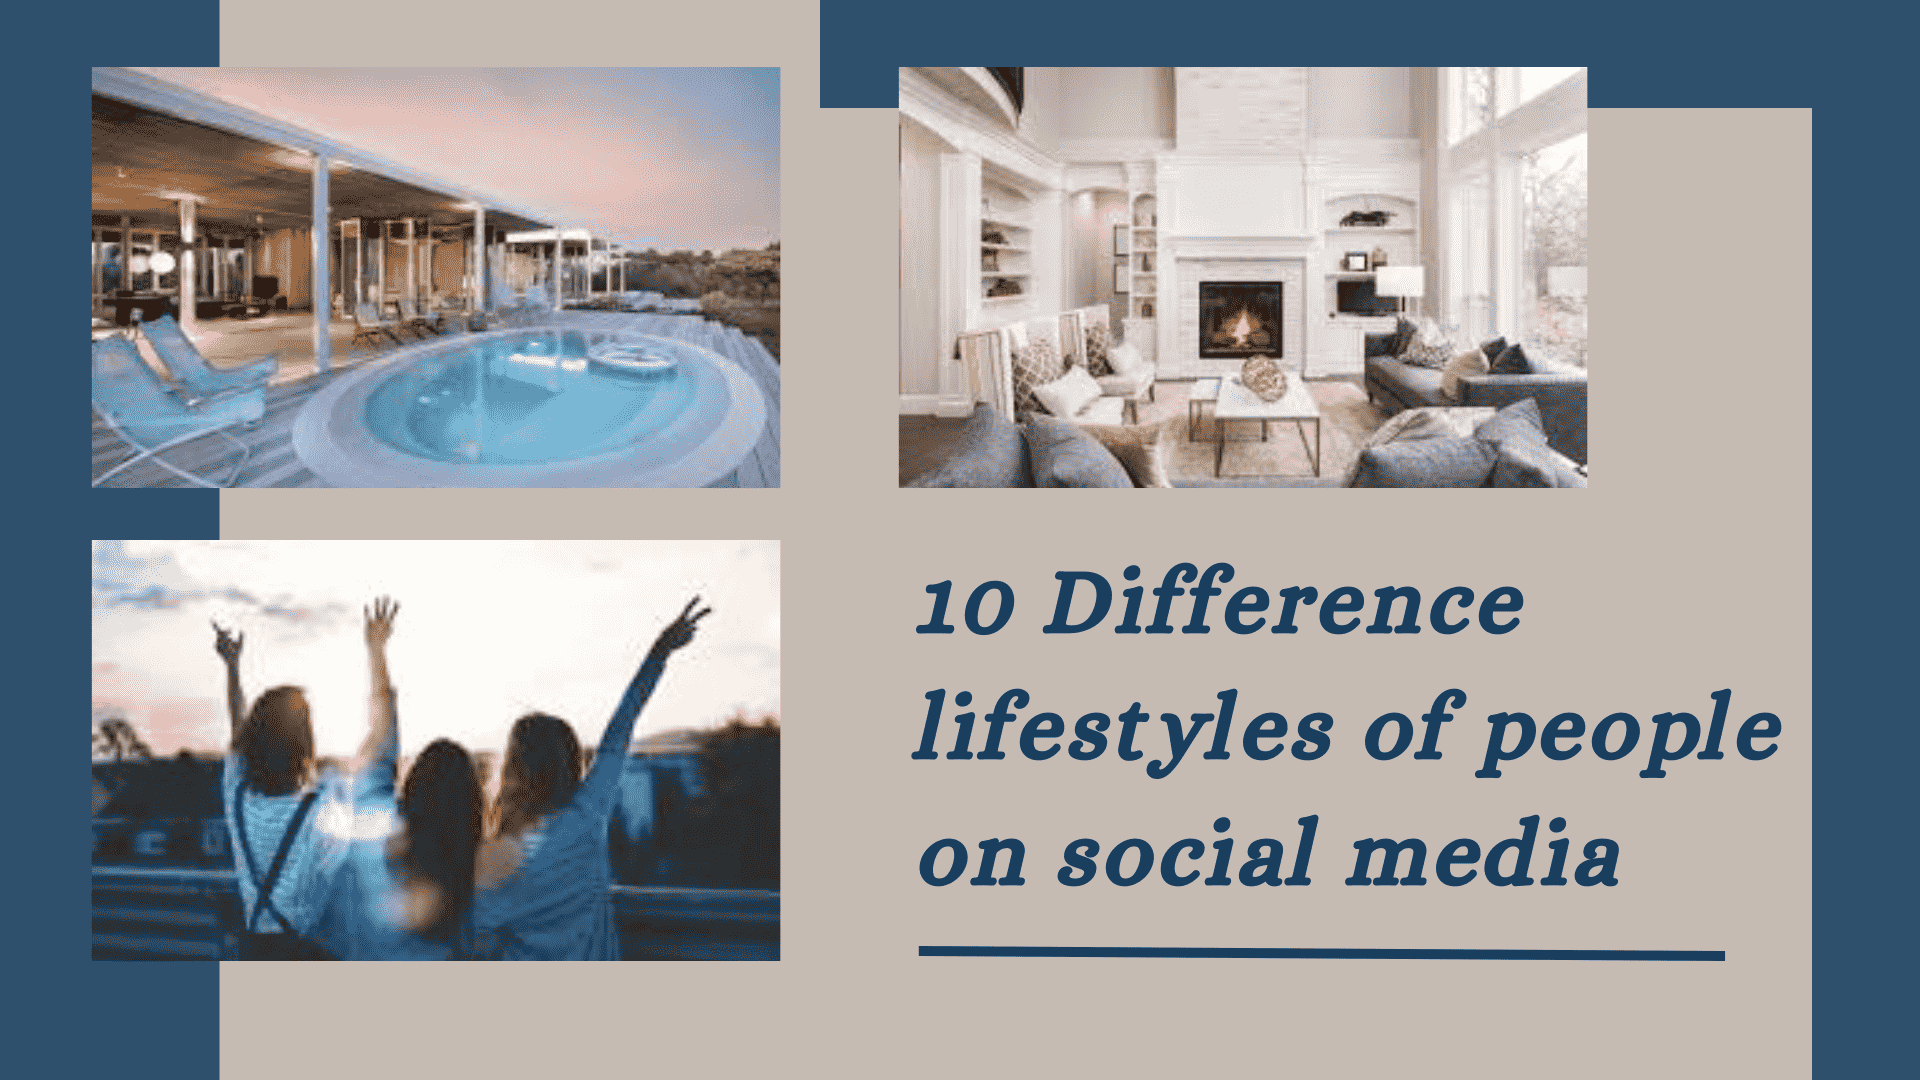 10 Difference lifestyles of people on social media